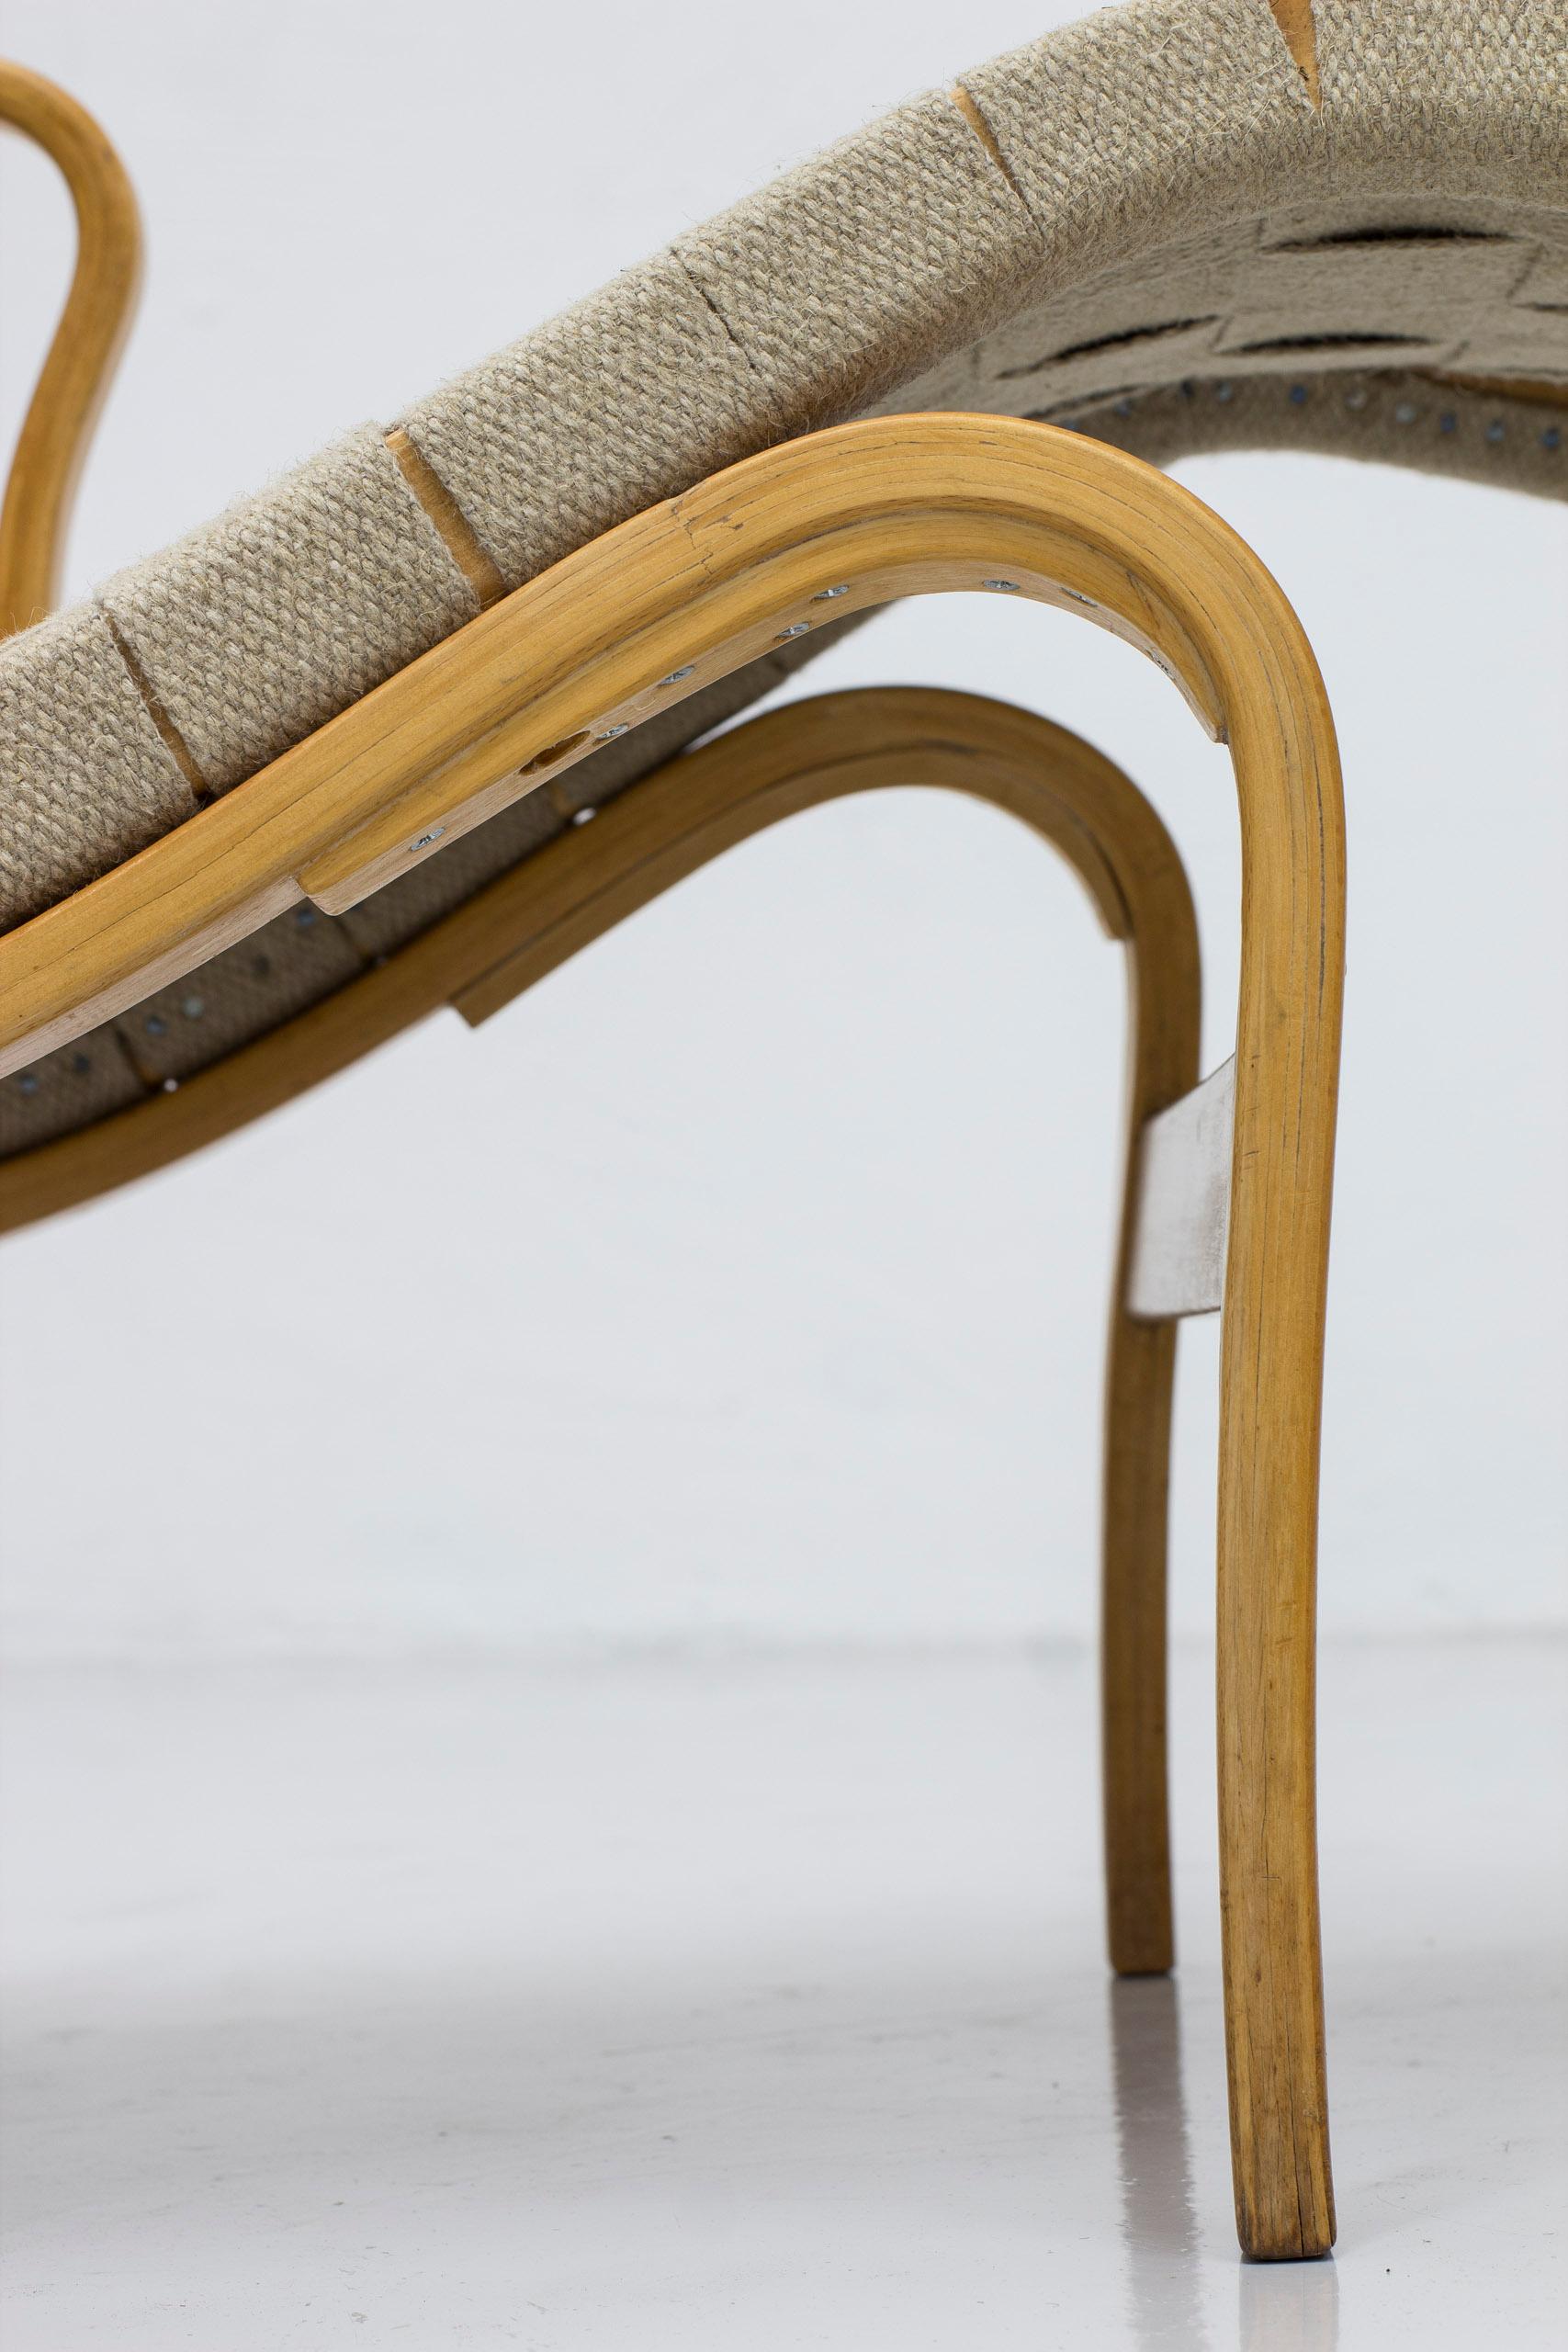 Model 36 chaise longues by Bruno Mathsson for Firma Karl Mathsson 1940s Sweden For Sale 9